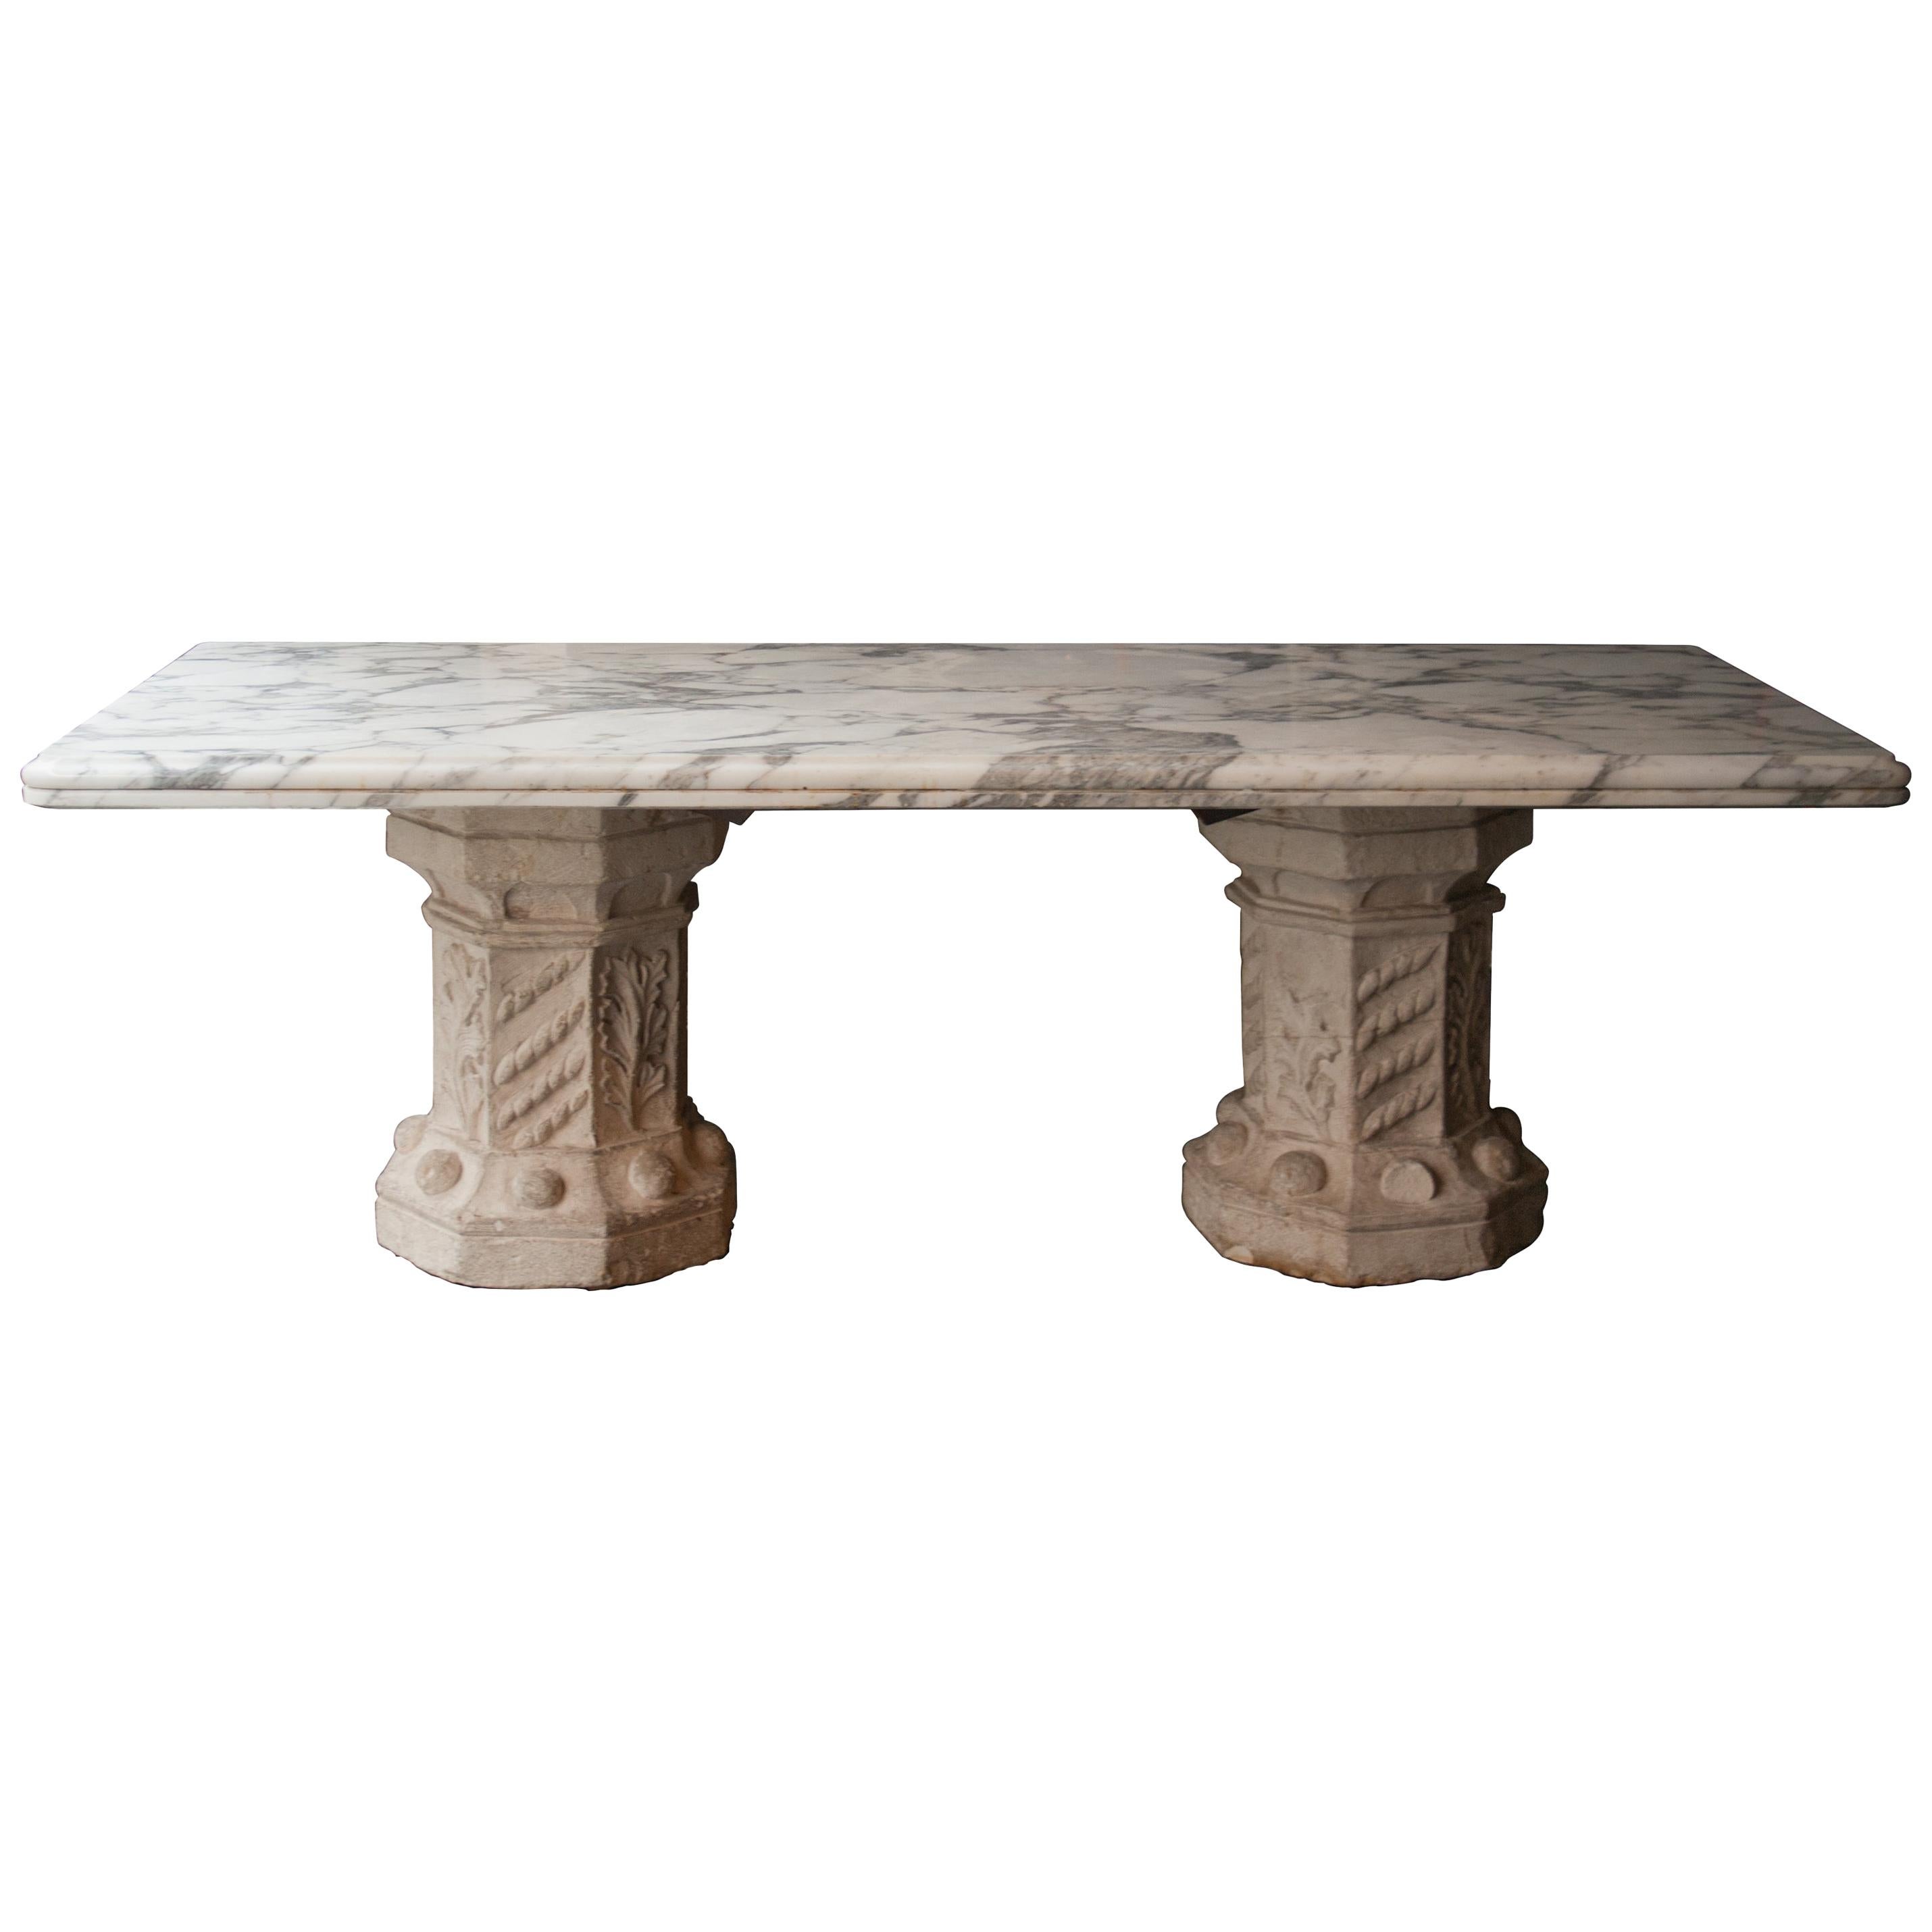 Historical Marble Limestone Handcrafted Columns Table, Spain, 1864 For Sale